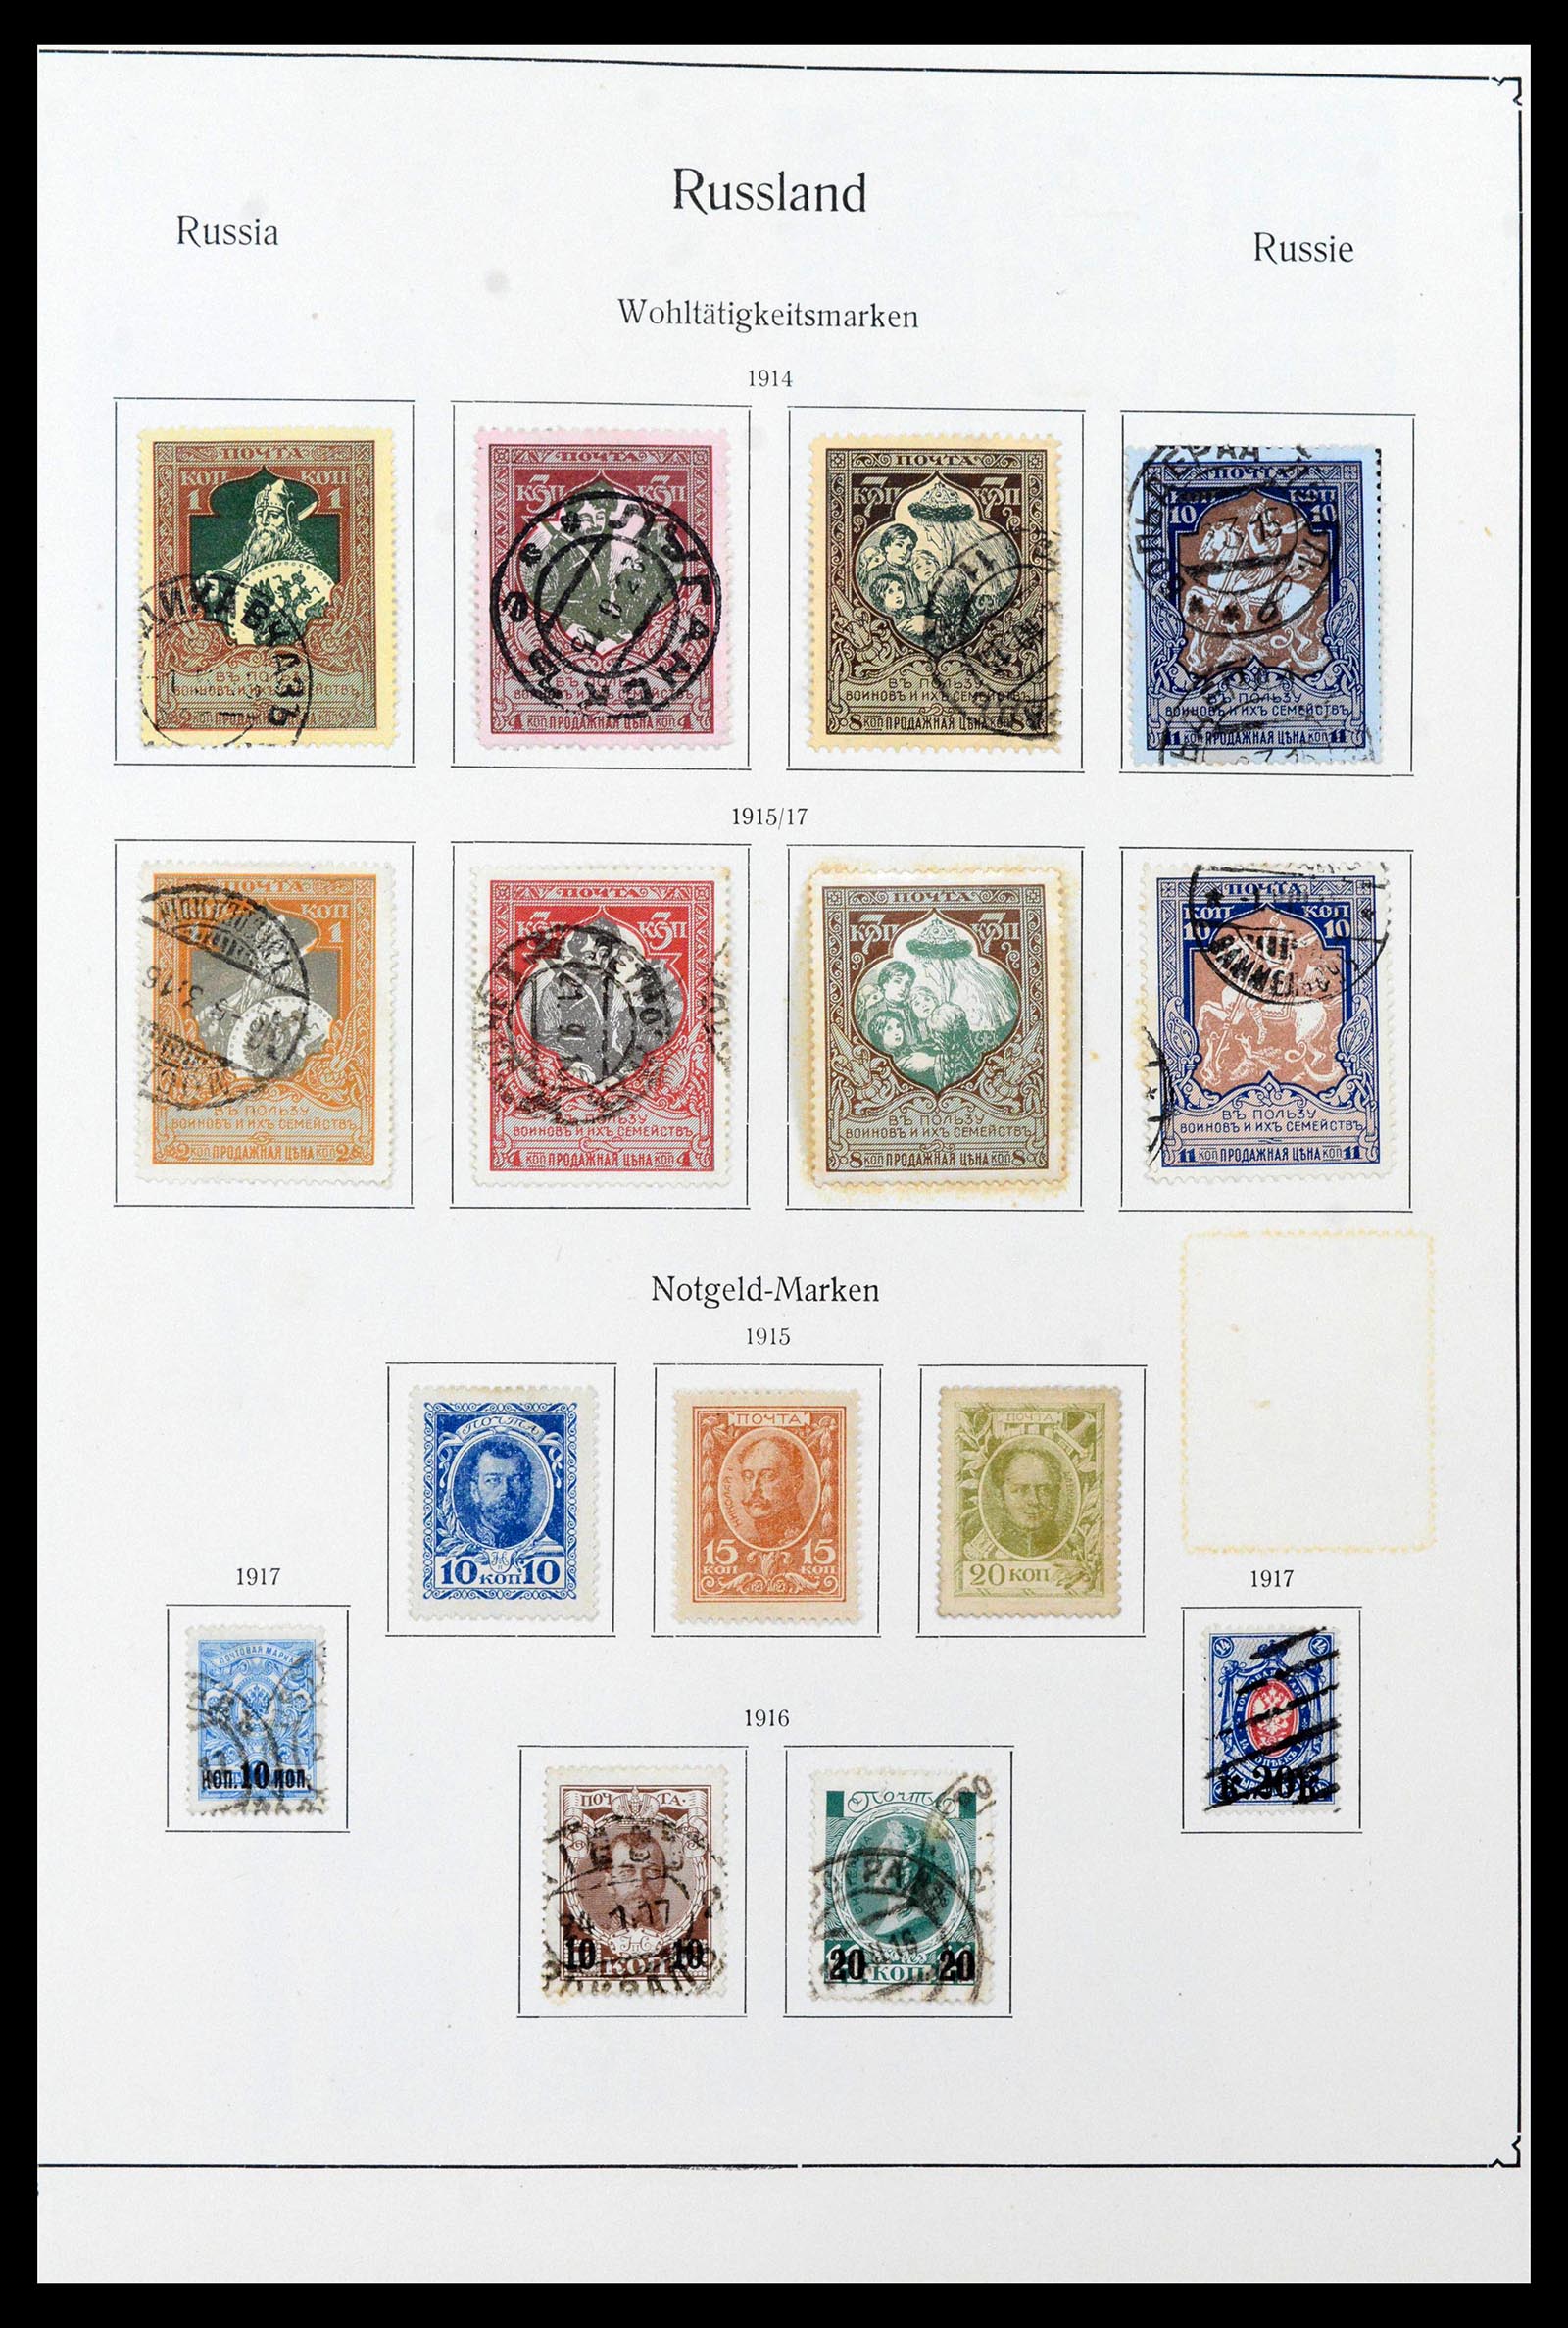 39086 0067 - Stamp collection 39086 Russia and territories 1858-1930.